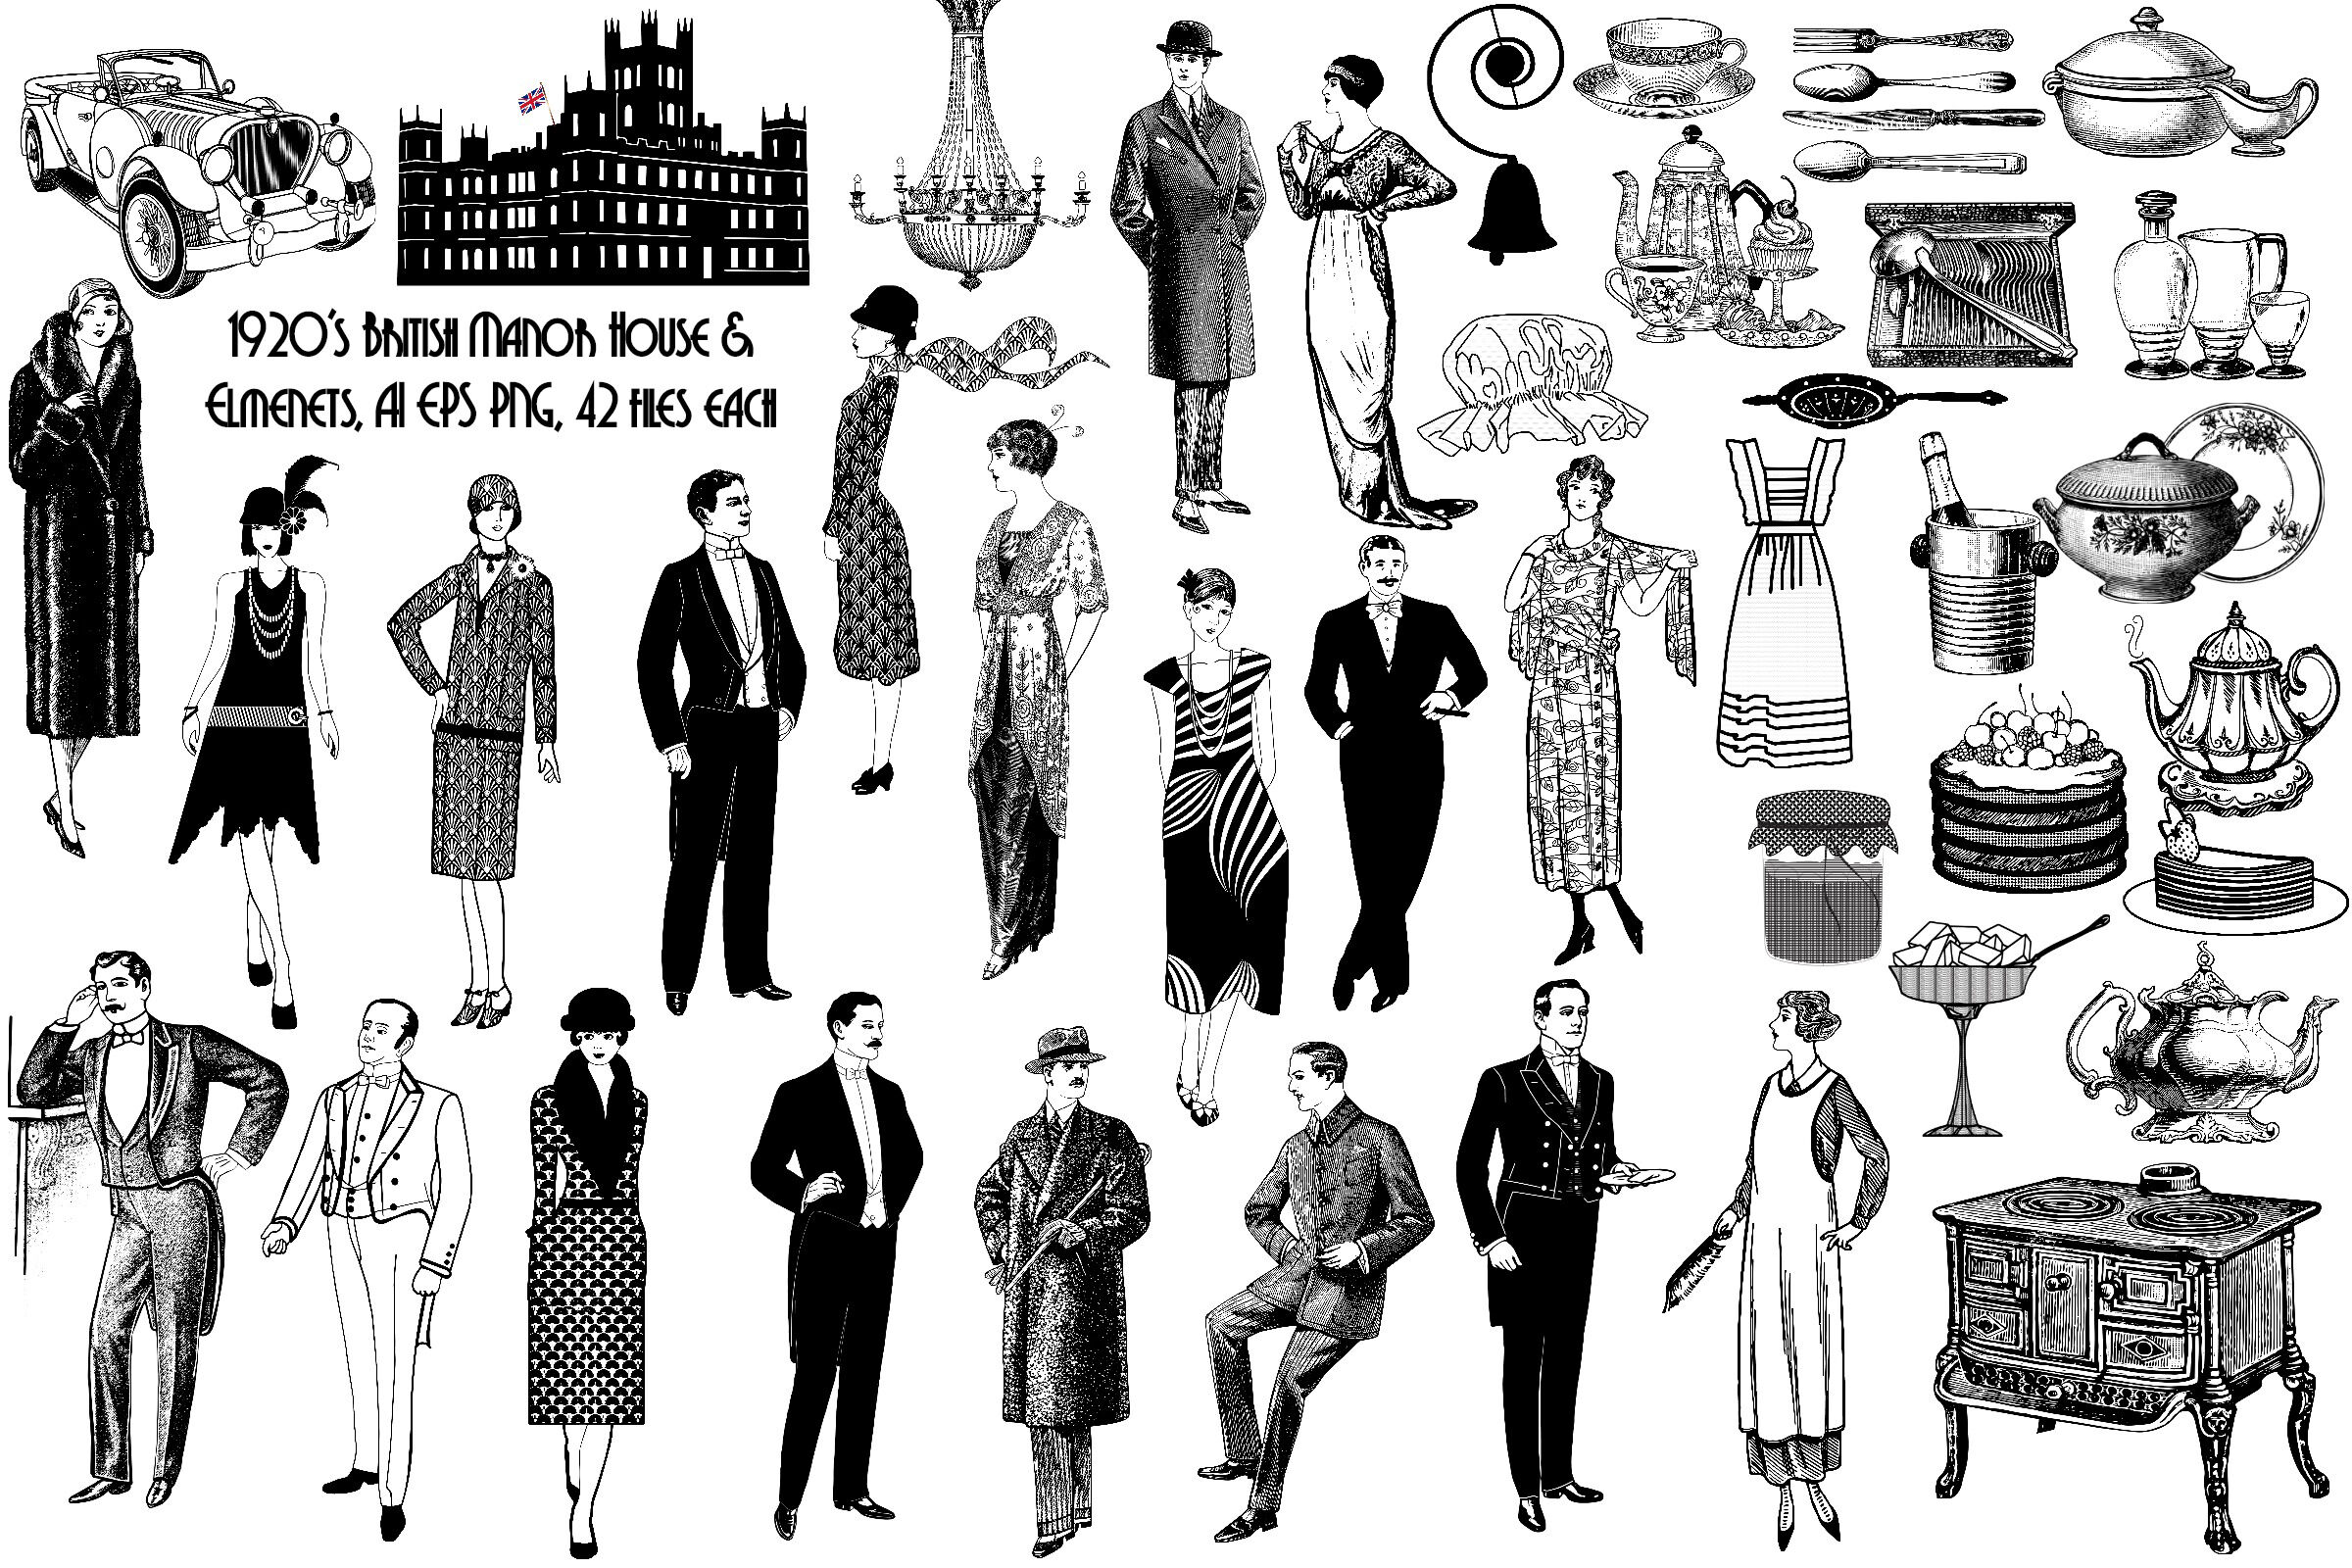 1920s British Manor House And Elements Ai Eps Png By Me And Amelie Thehungryjpeg Com